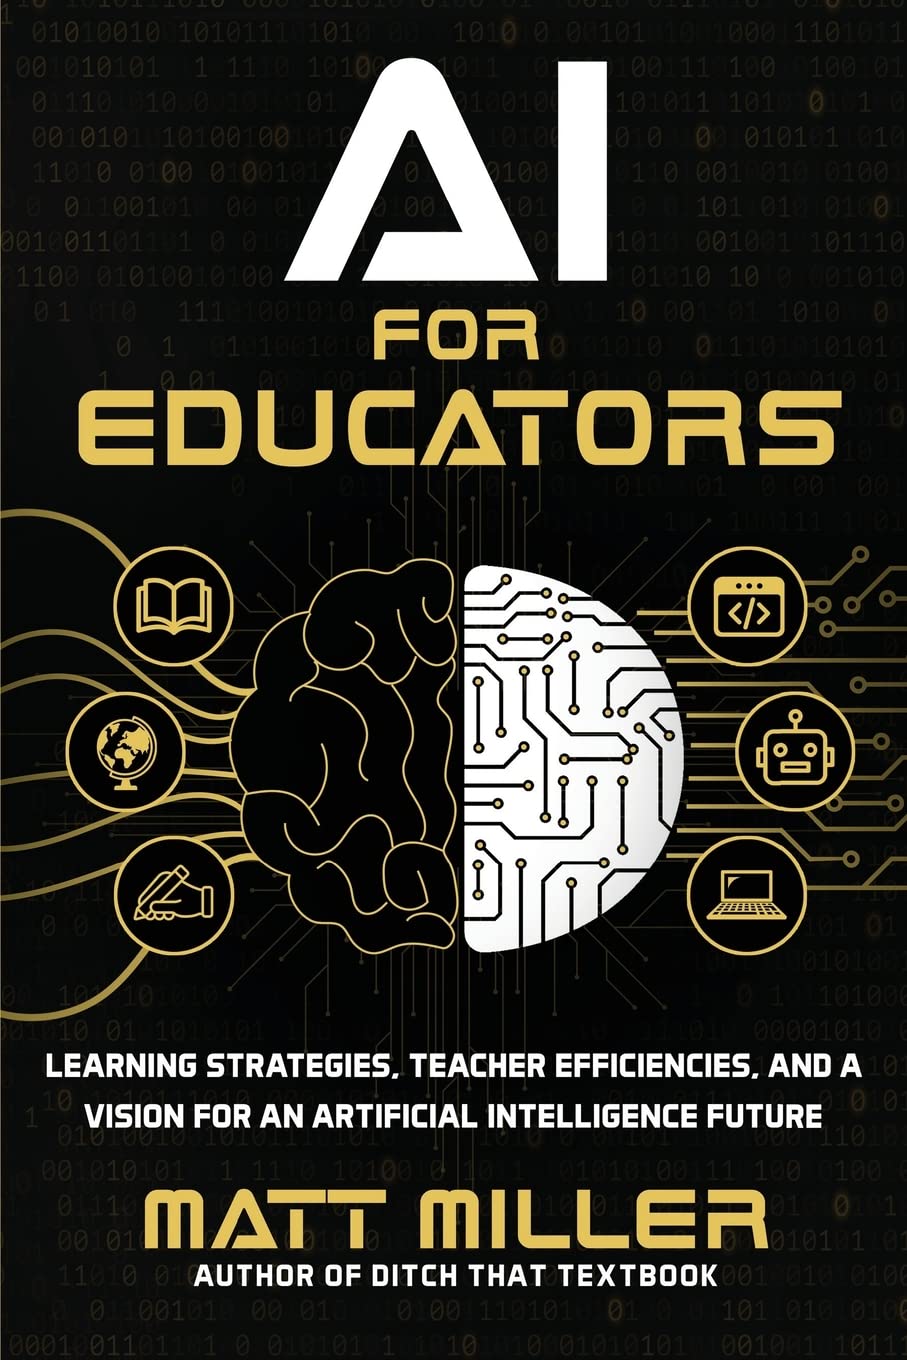 Image AI for educators : learning strategies, teacher efficiencies, and a vision for an artificial intelligence future